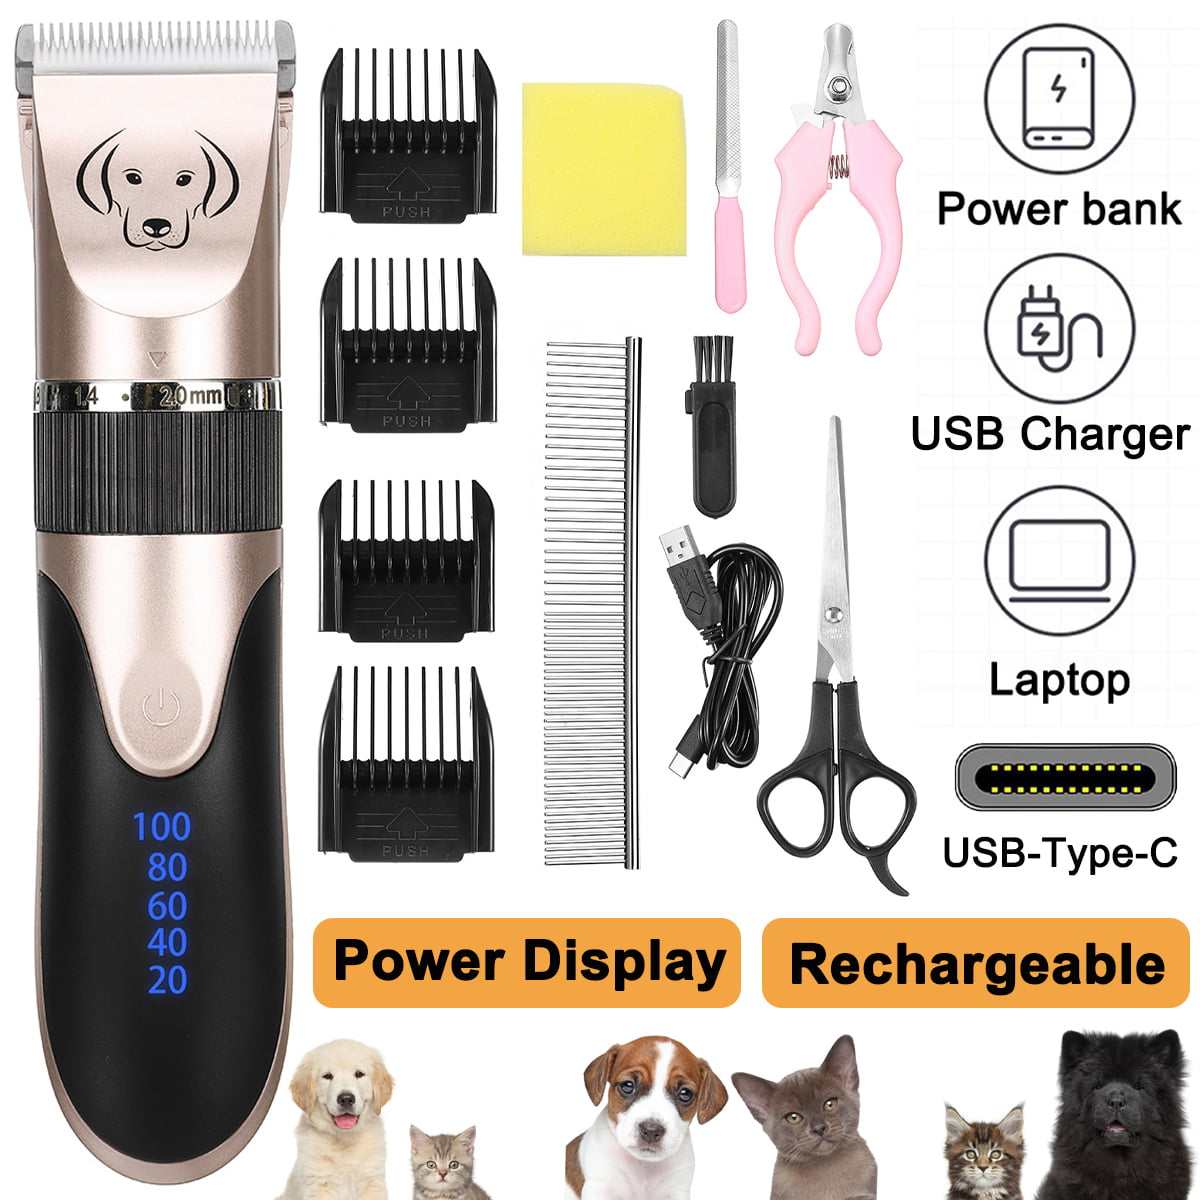 Uiter Dog Clippers Grooming Clippers Kit Low Noise Rechargeable Cordless Quiet Dog Shave Clippers for Dogs Cats Pets Professional Electric Dog Trimmers Clippers Set